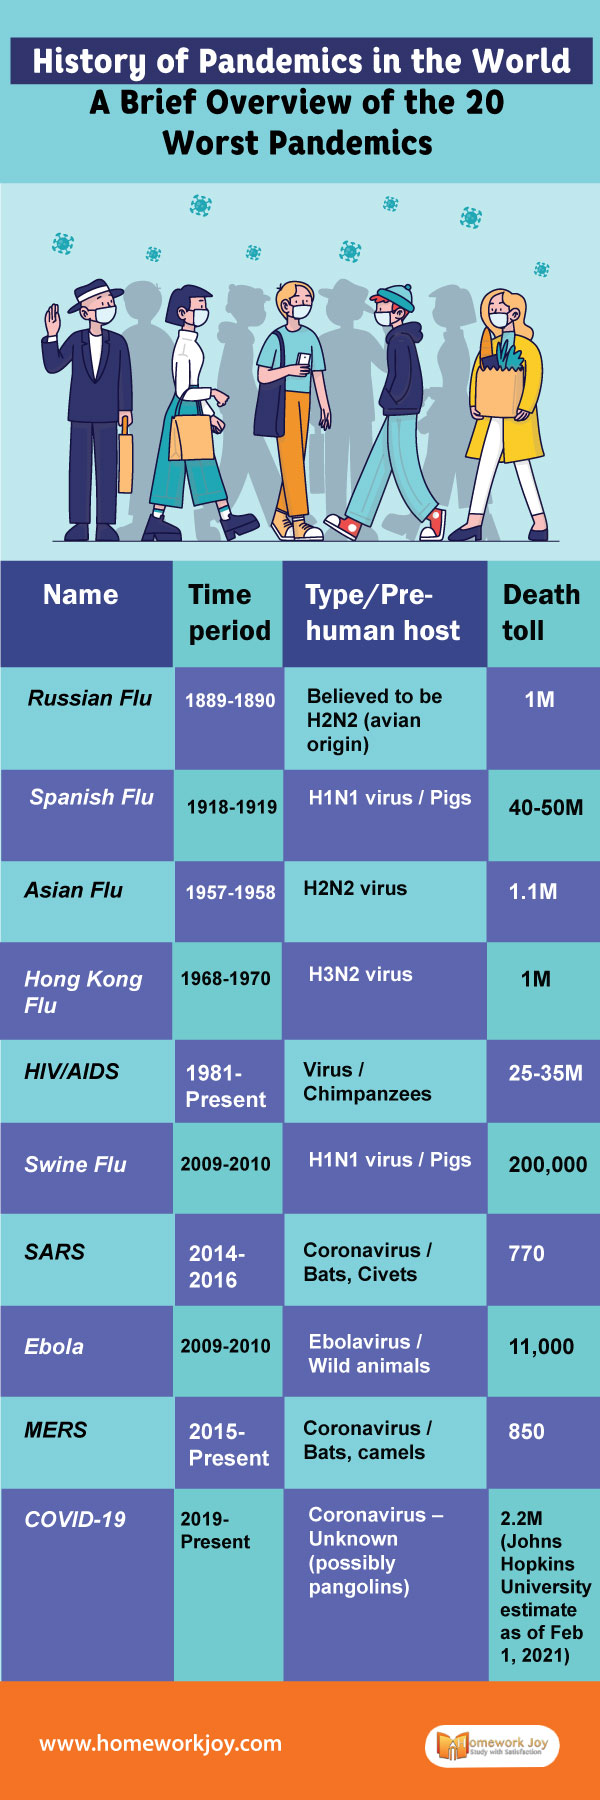 History of Pandemics in the World